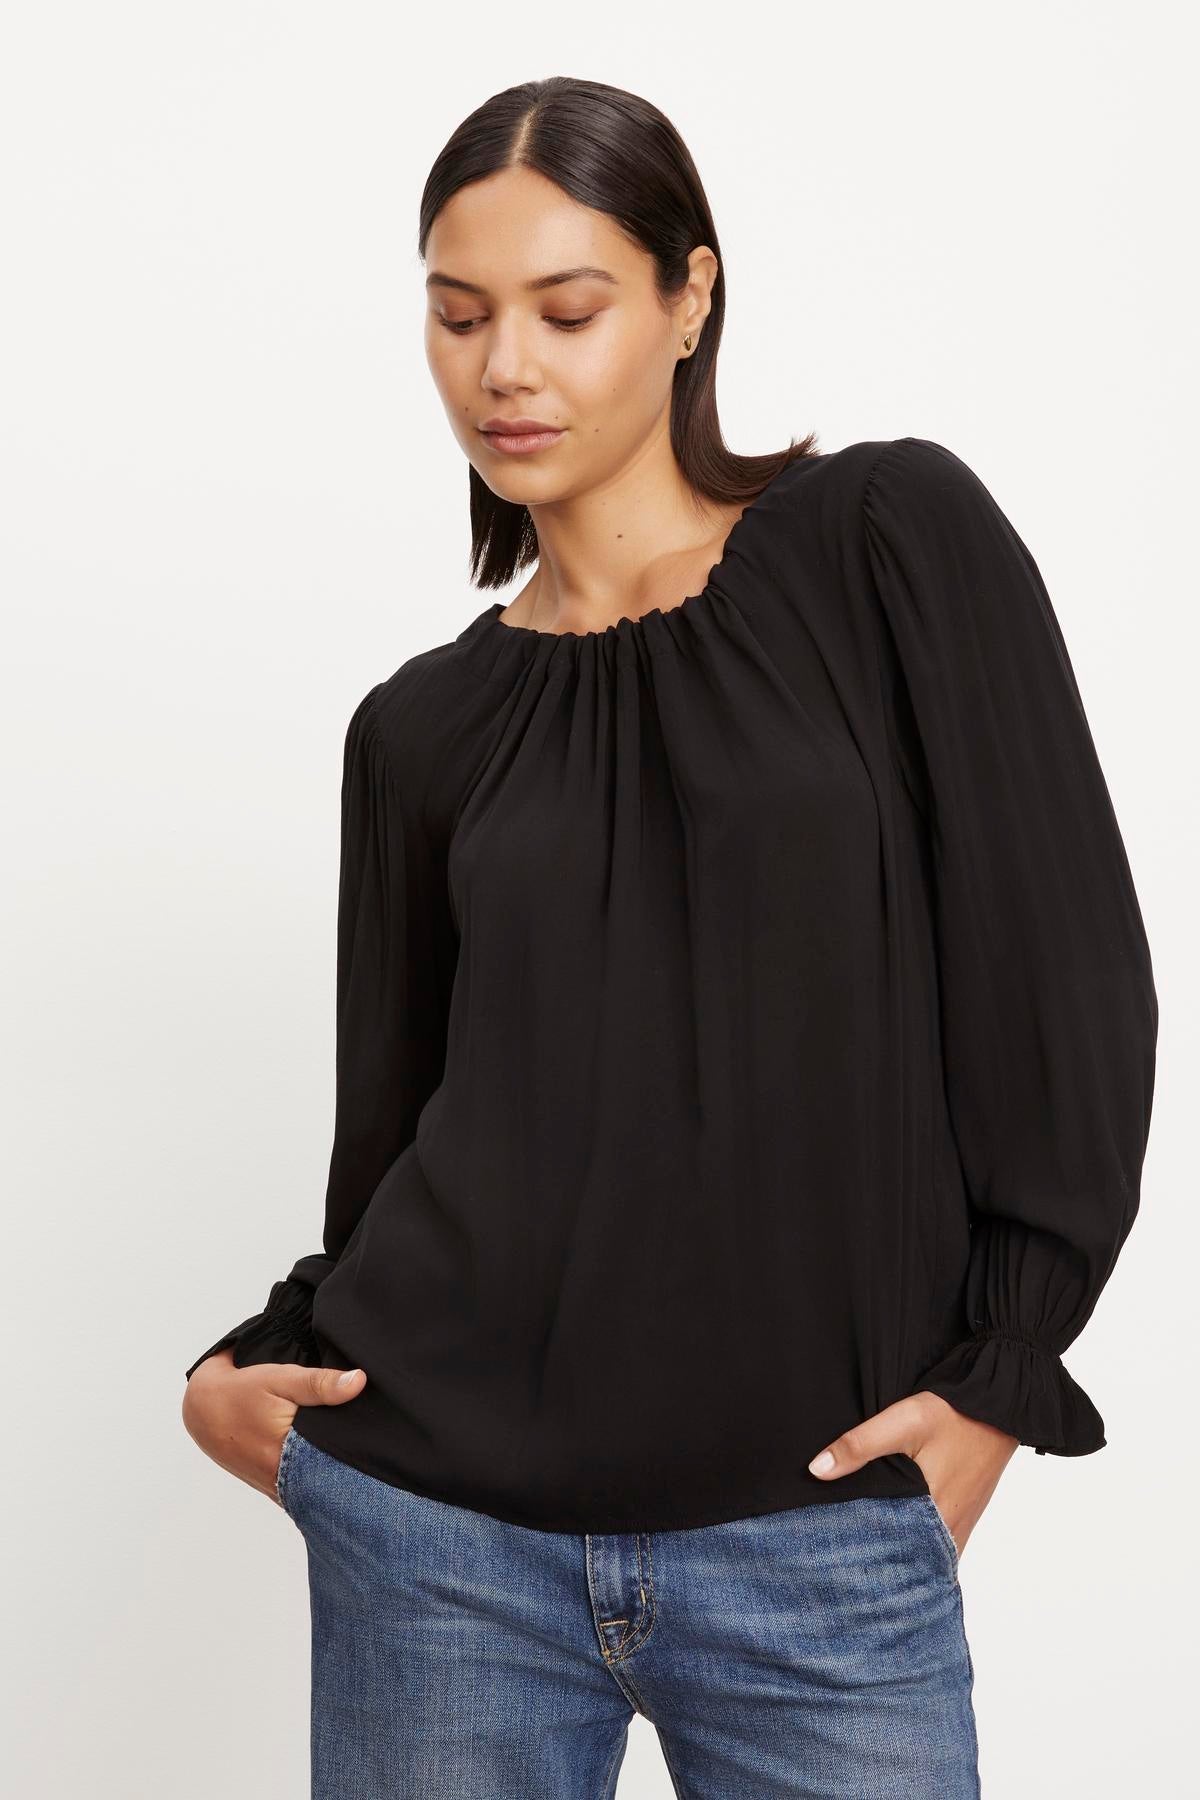 The model is wearing a Velvet by Graham & Spencer BRISTOL NECK TIE TOP, a luxurious black blouse with pleated sleeves, made from rayon challis fabric.-36001351008449